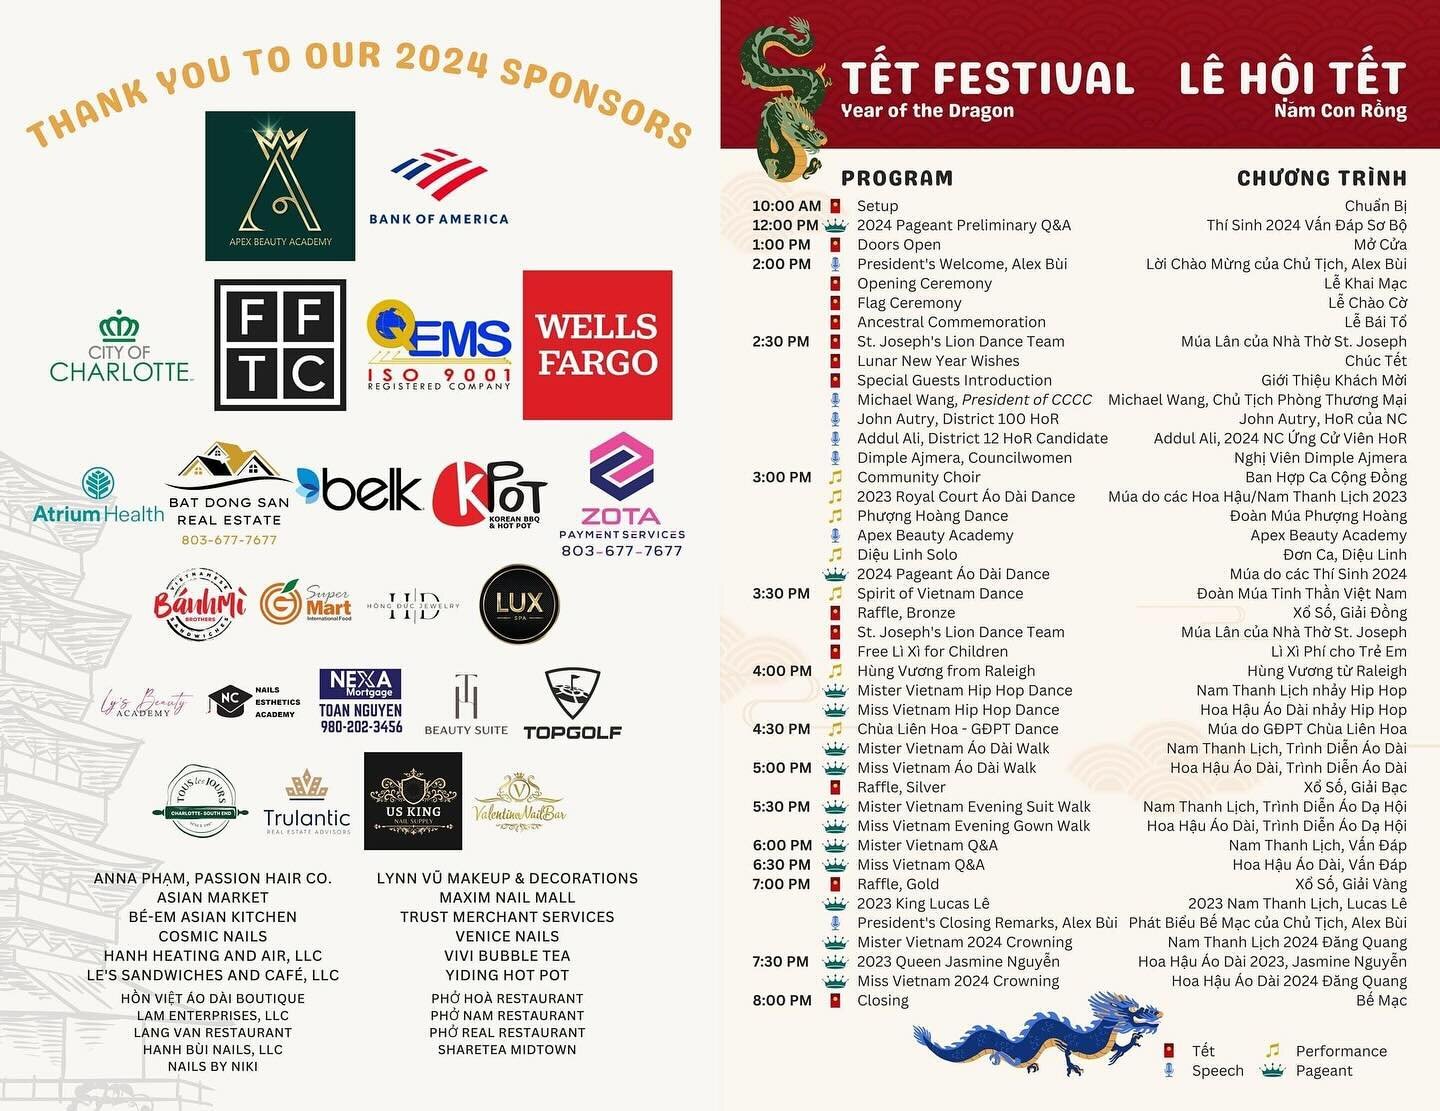 The 2024 Tết Program is packed!! We are very excited to have over 50 vendors for this years 2024 Tết Festival and tons of awesome performances. Our festival would not been made possible without all of our amazing sponsors.

Apex Beauty Academy
Bank o